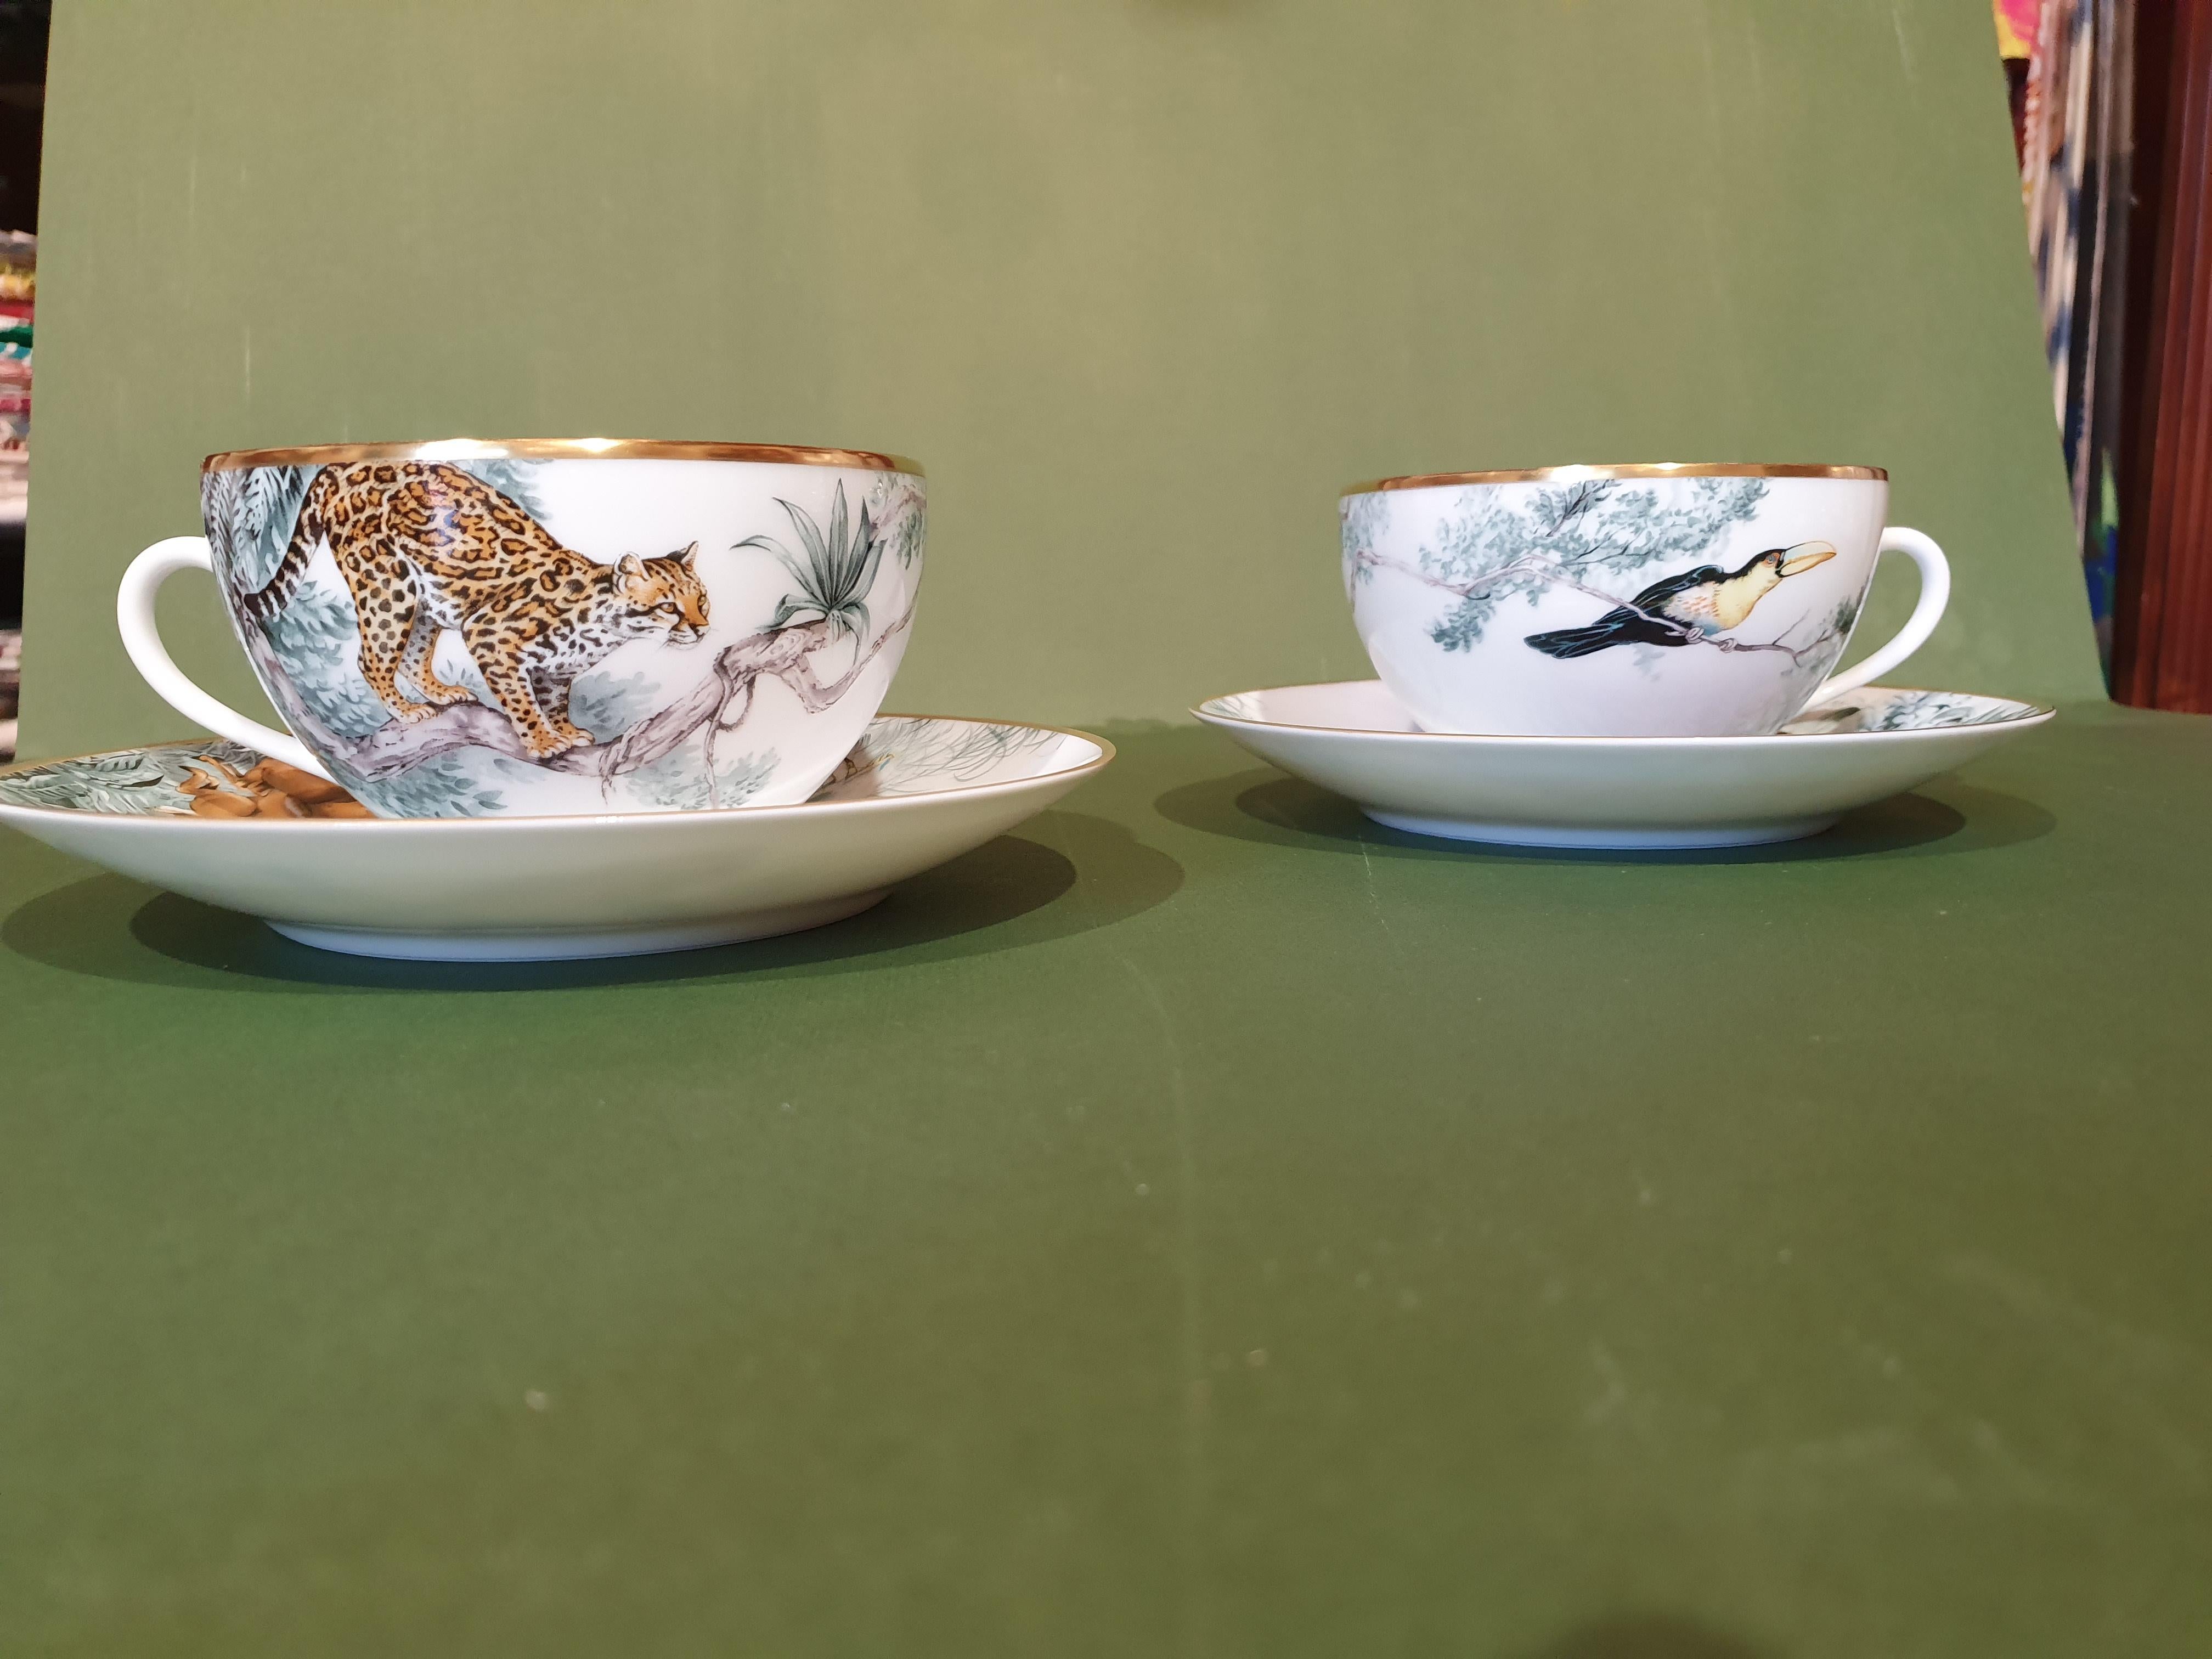 A set of two breakfast cups and saucers.
Hermès Carnets d' Equateur: jaguars, macaws, panthers and impalas frolic through lush natural settings under the watchful eye of naturalist and painter Robert Dallet. This porcelain collection breathes new